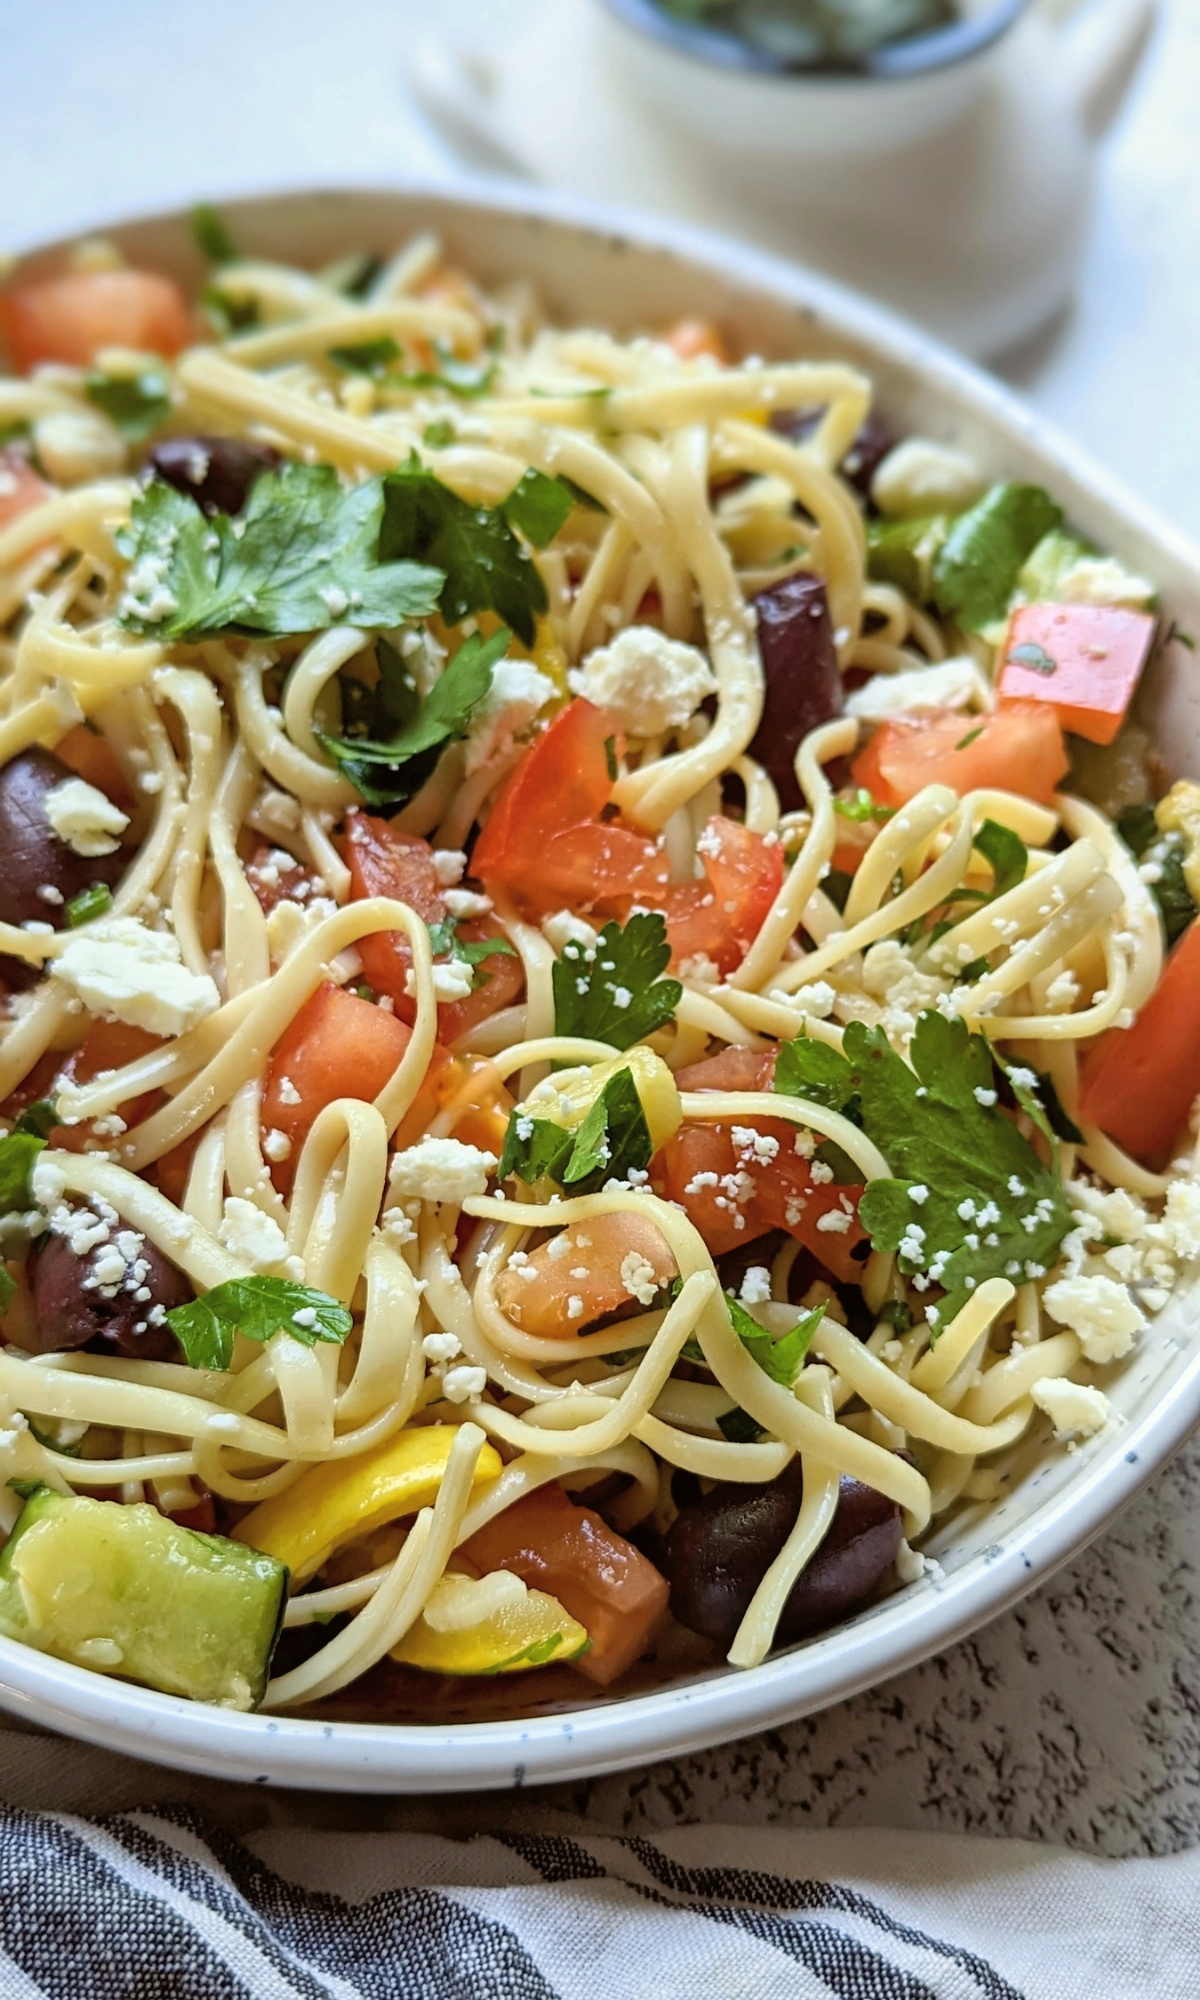 vegetable linguine noodle pasta salad recipe with tomatoes cucumber bell peppers parsley feta cheese olives in a red wine vinegar salad dressing.